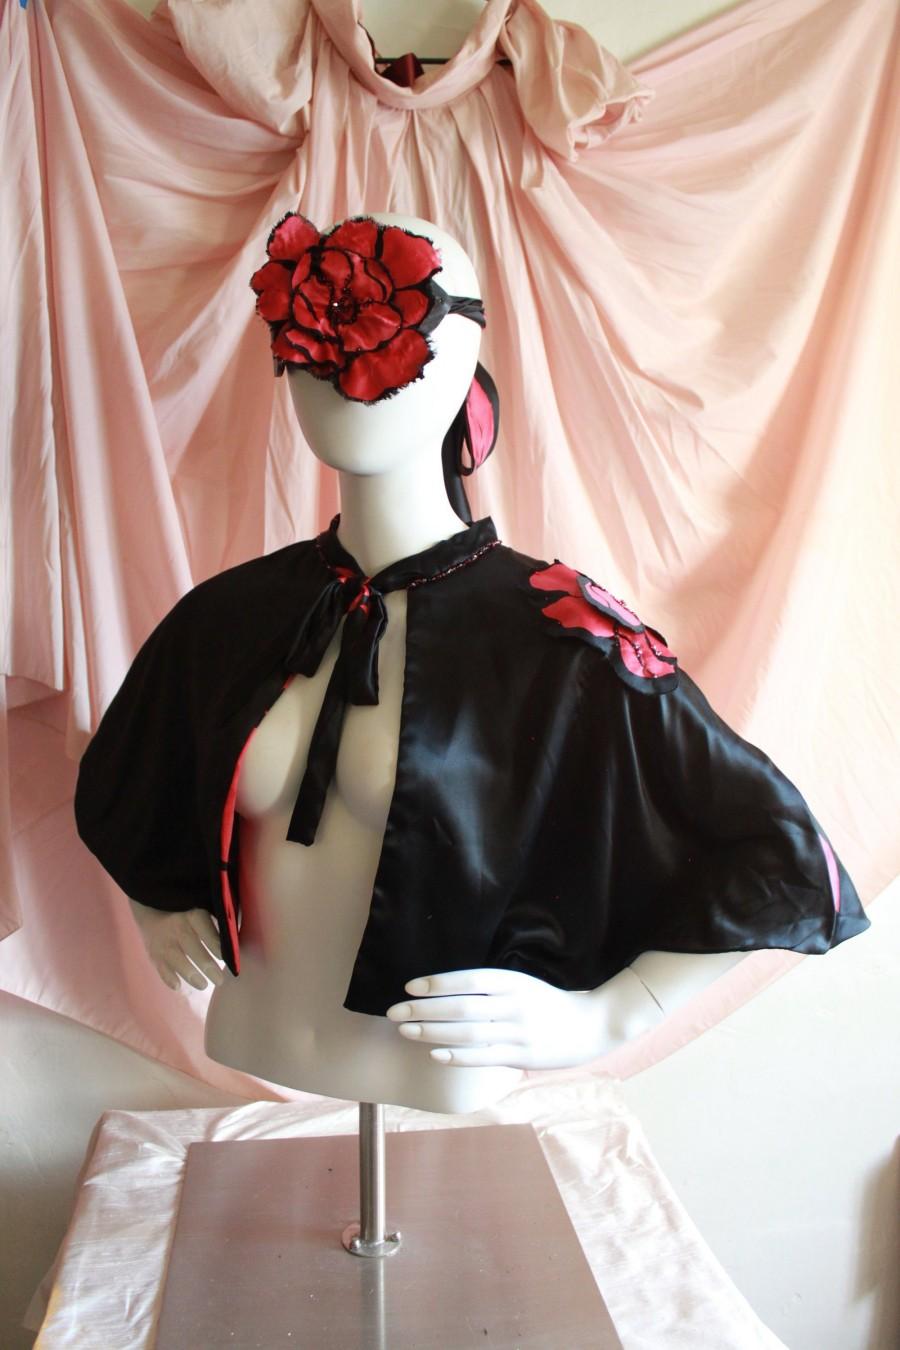 Wedding - The Bloom - Black & Pink Silk Charmeuse Capelet with Large Beaded Flower Applique - Silk Floral Boudoir Cape - Erotic Boudoir Accessory